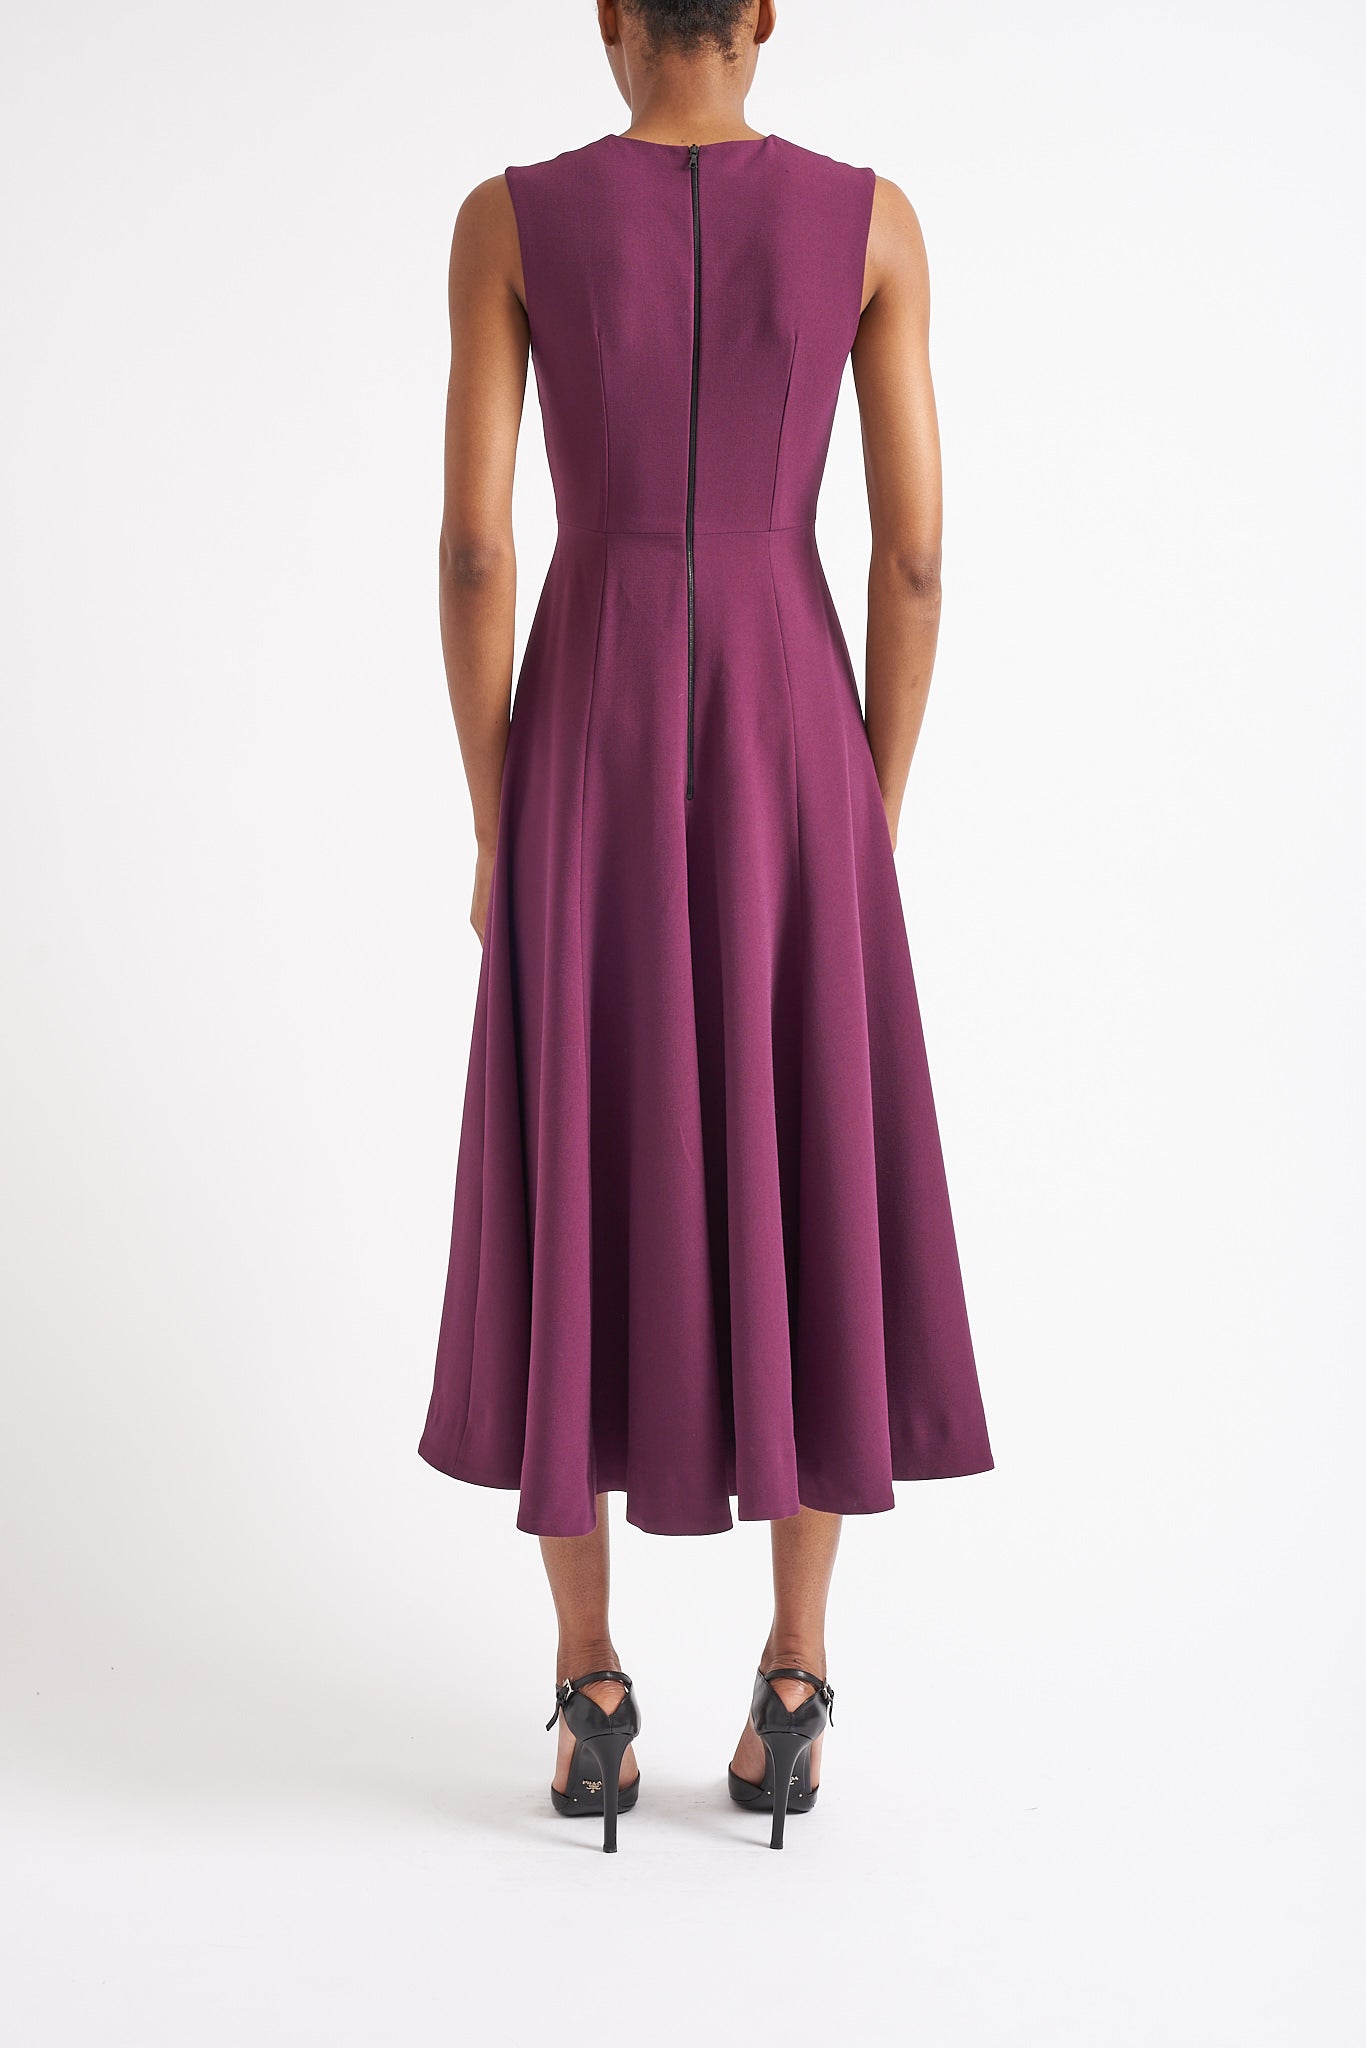 OLIVE SUSTAINABLY SOURCED BLACKBERRY CADY DRESS